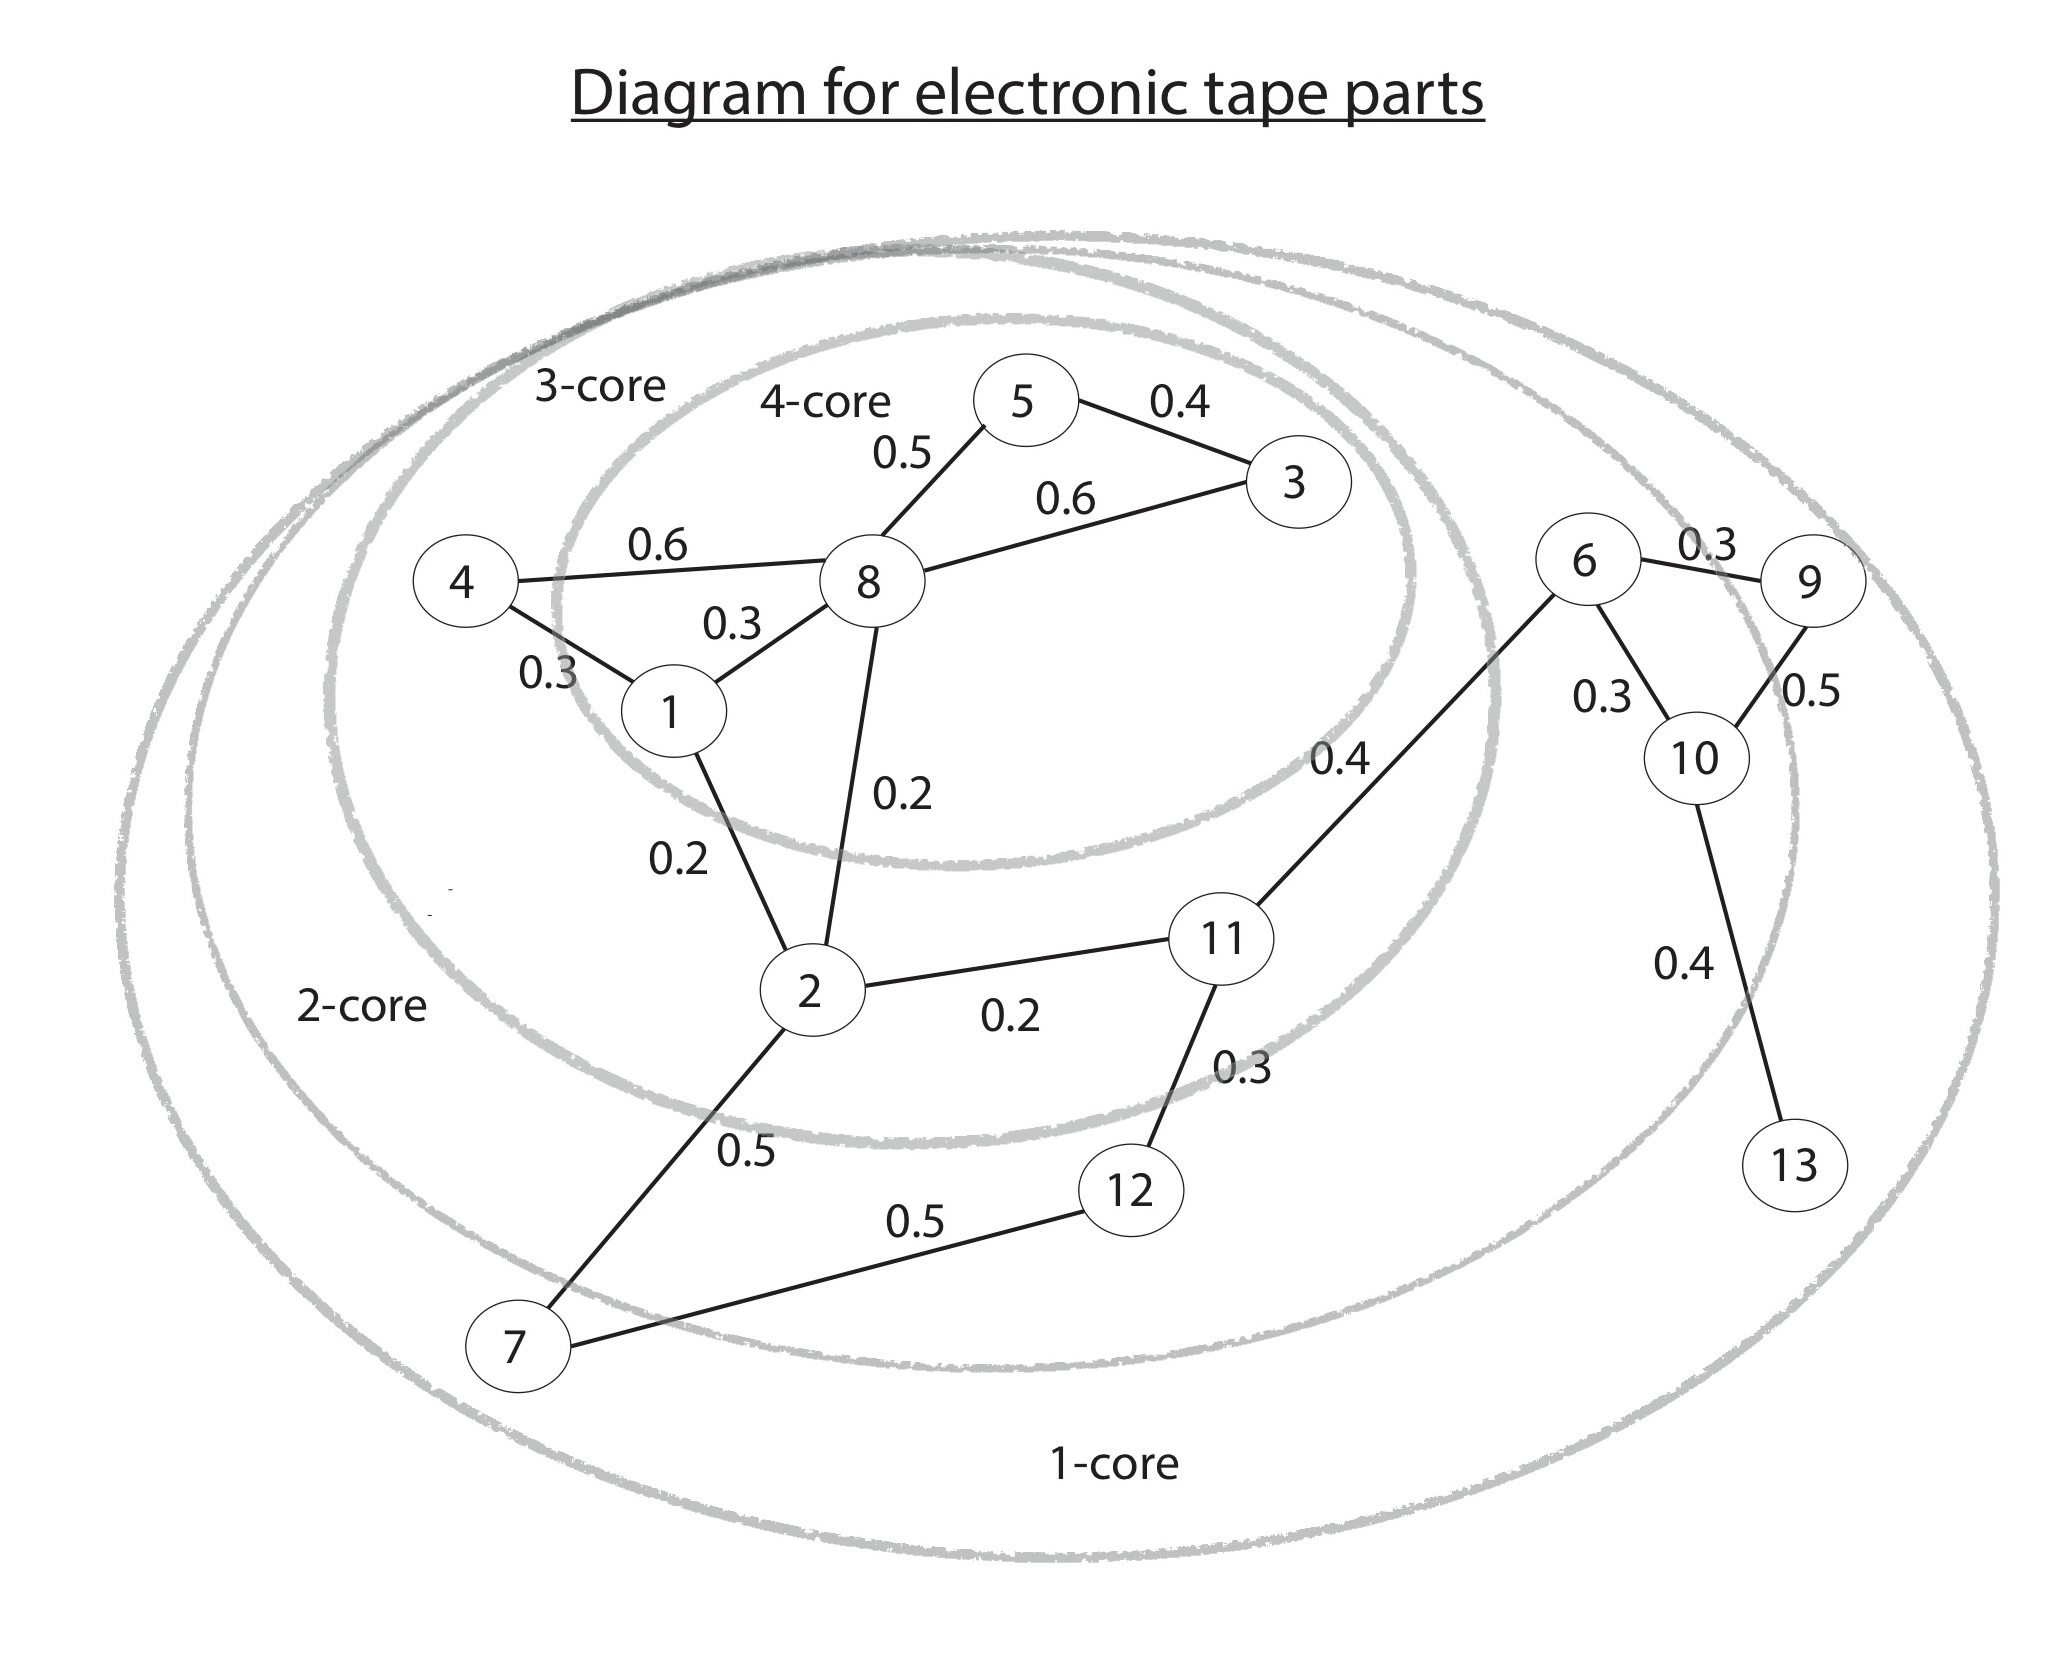 Diagrams for Electronics - New possibilities